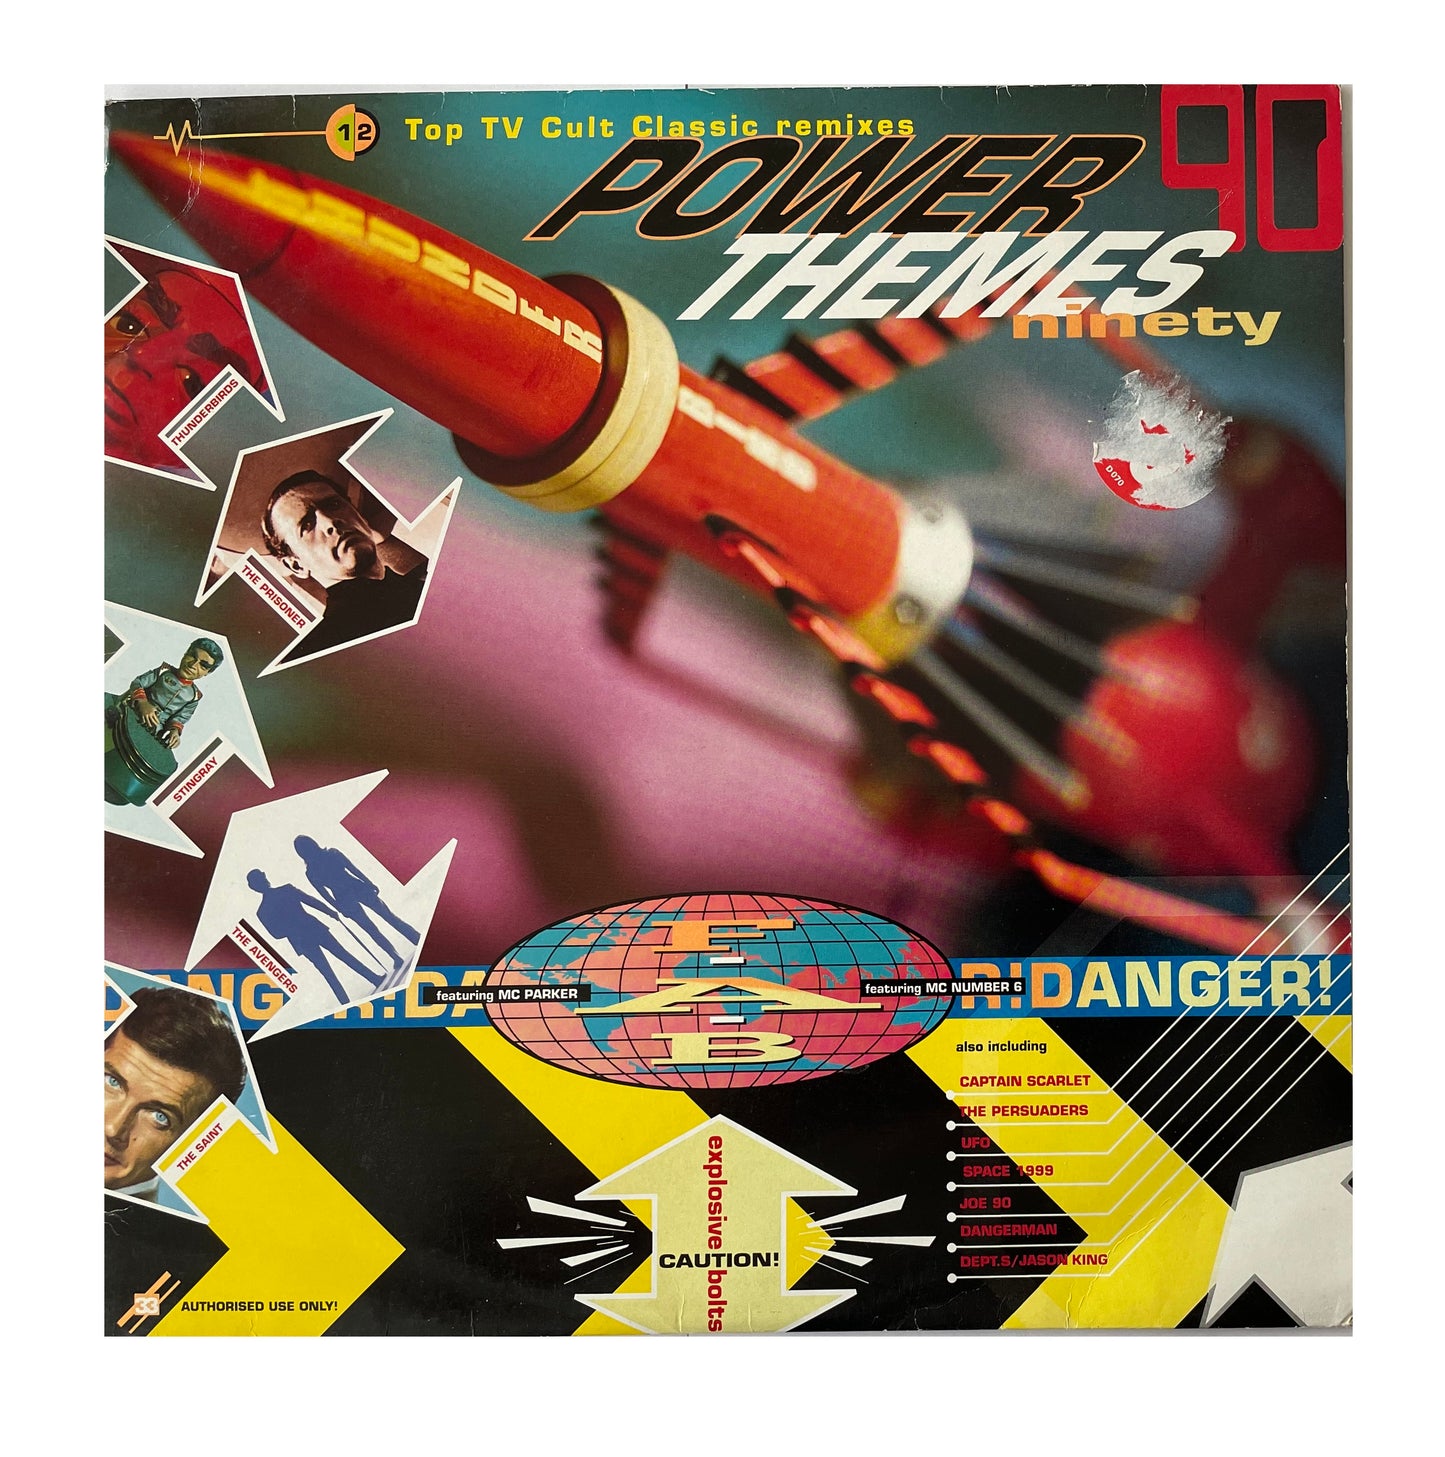 Vintage 1990 Power Themes Ninety - Top TV Cult Classic Remixes - 12 Inch Vinyl Record Album - Shop Stock Room Find